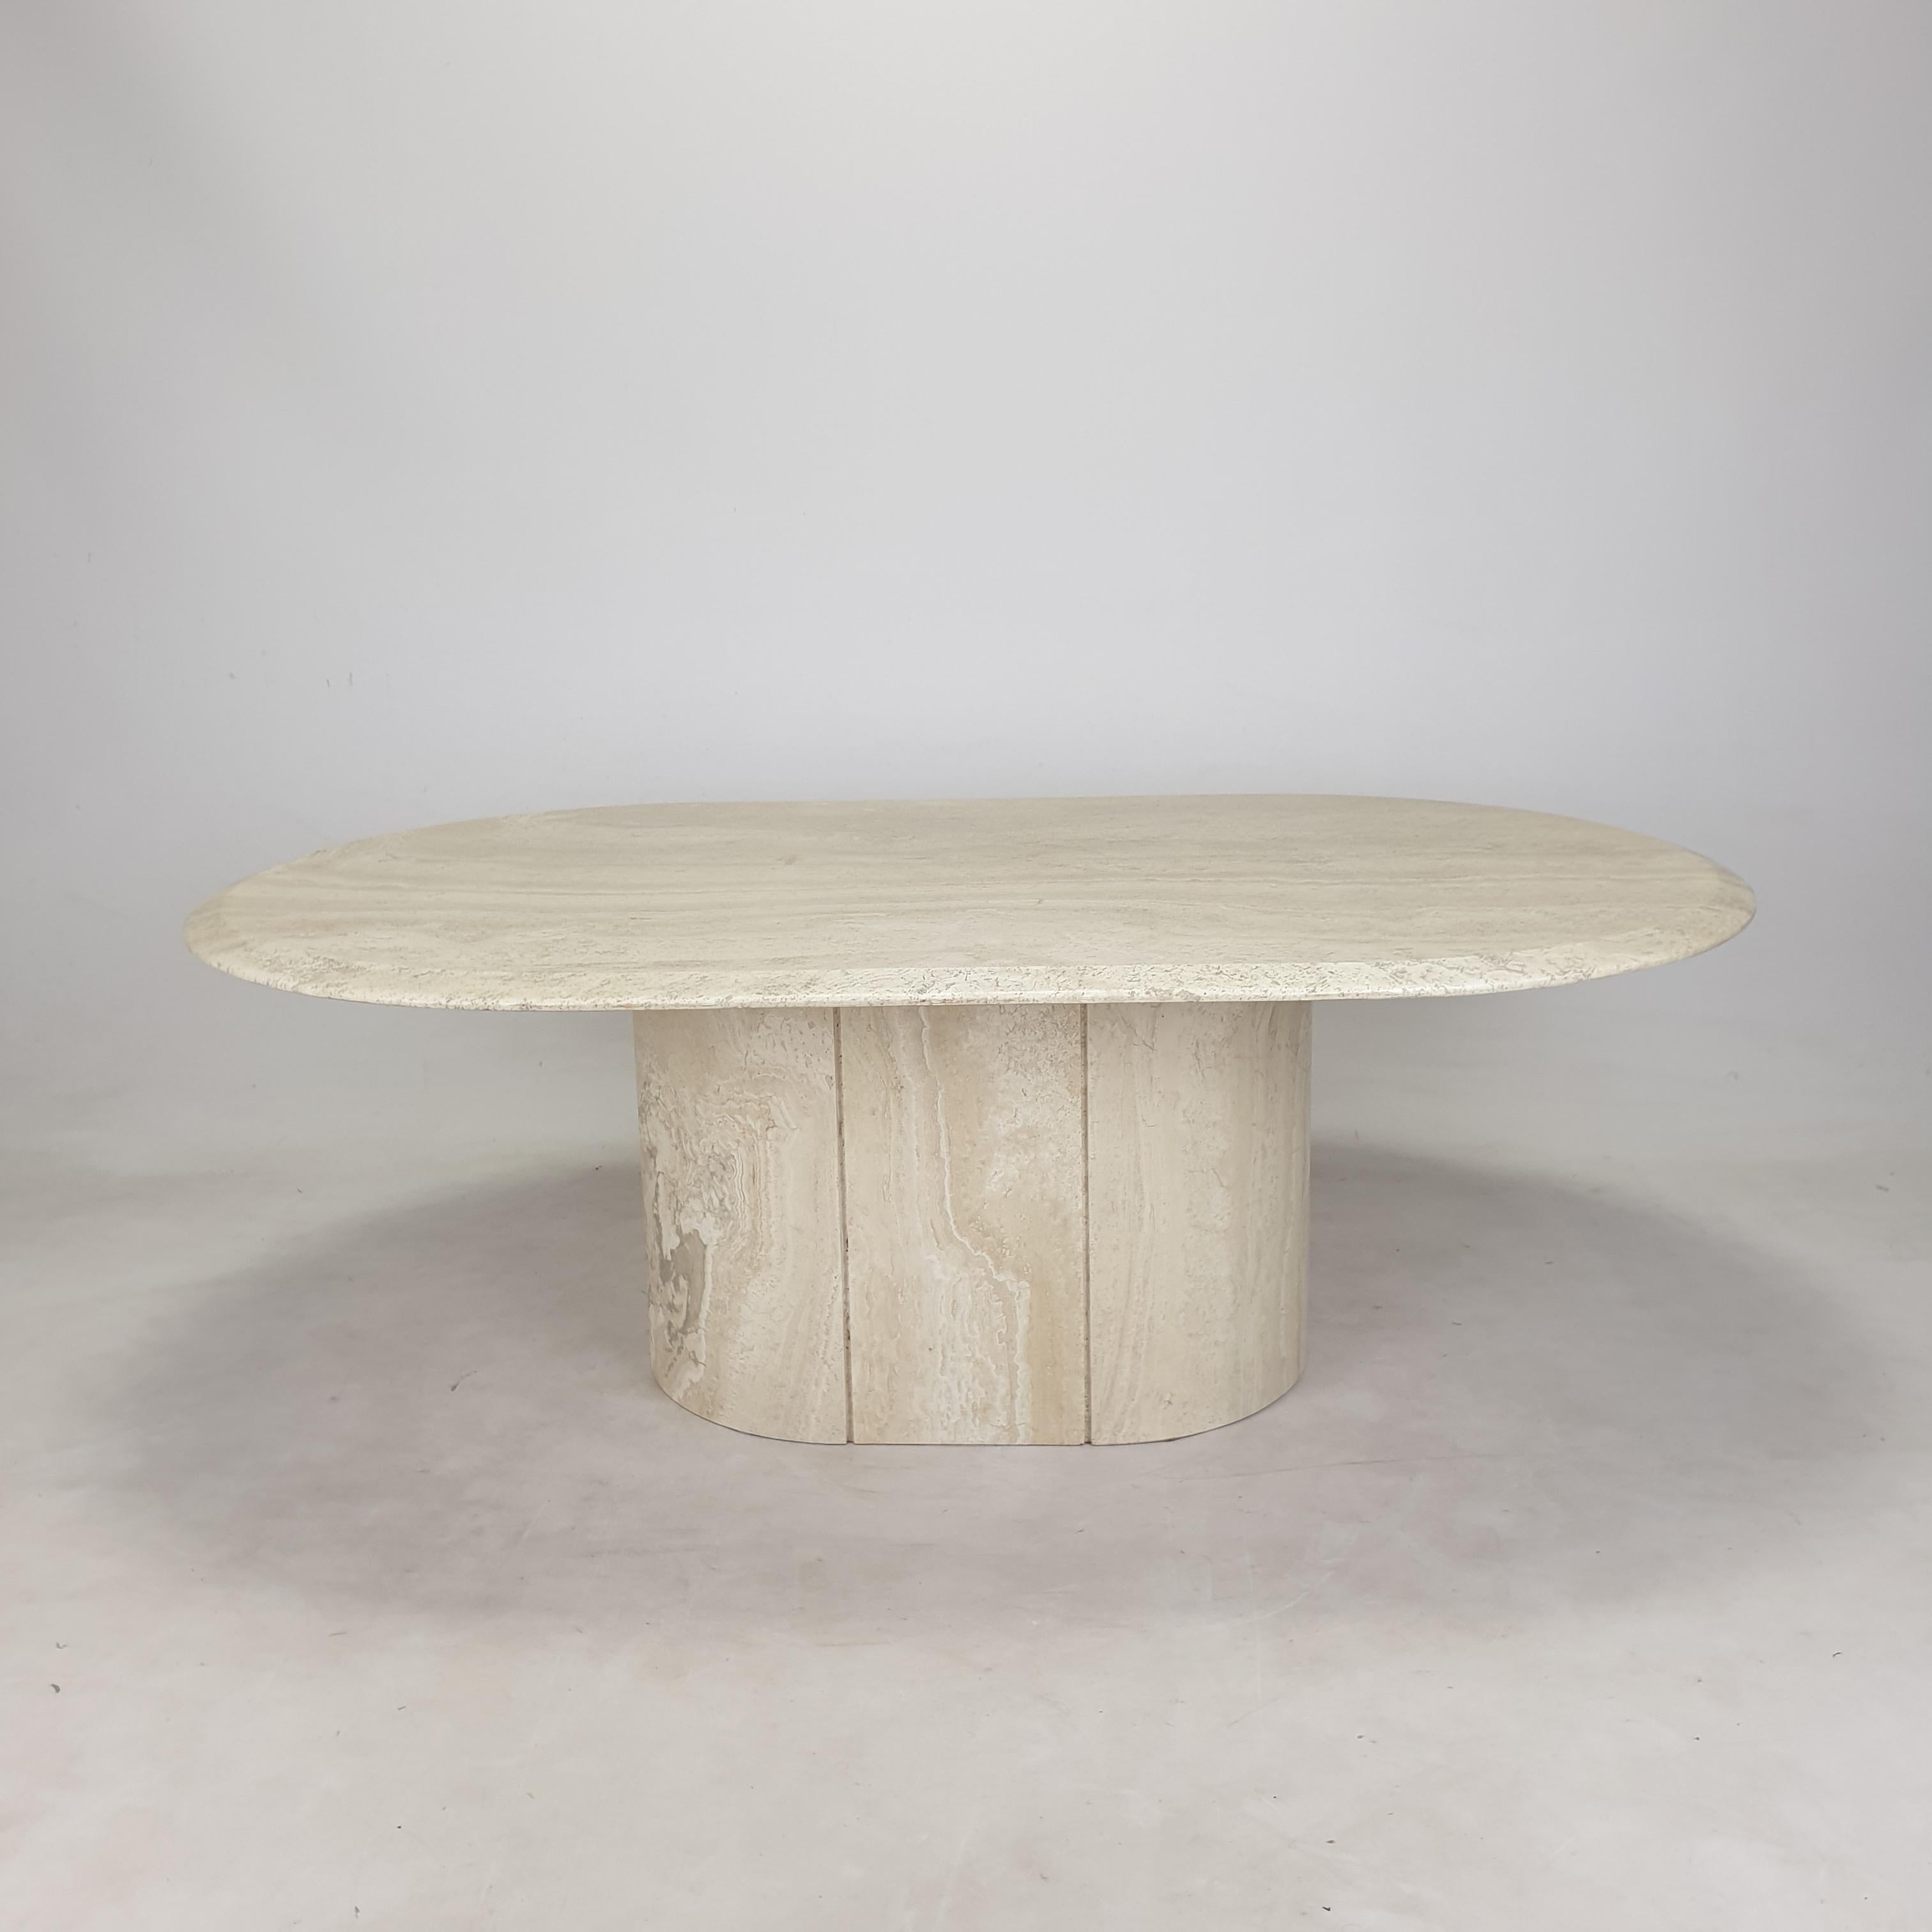 Hand-Crafted Italian Oval Travertine Coffee Table, 1984